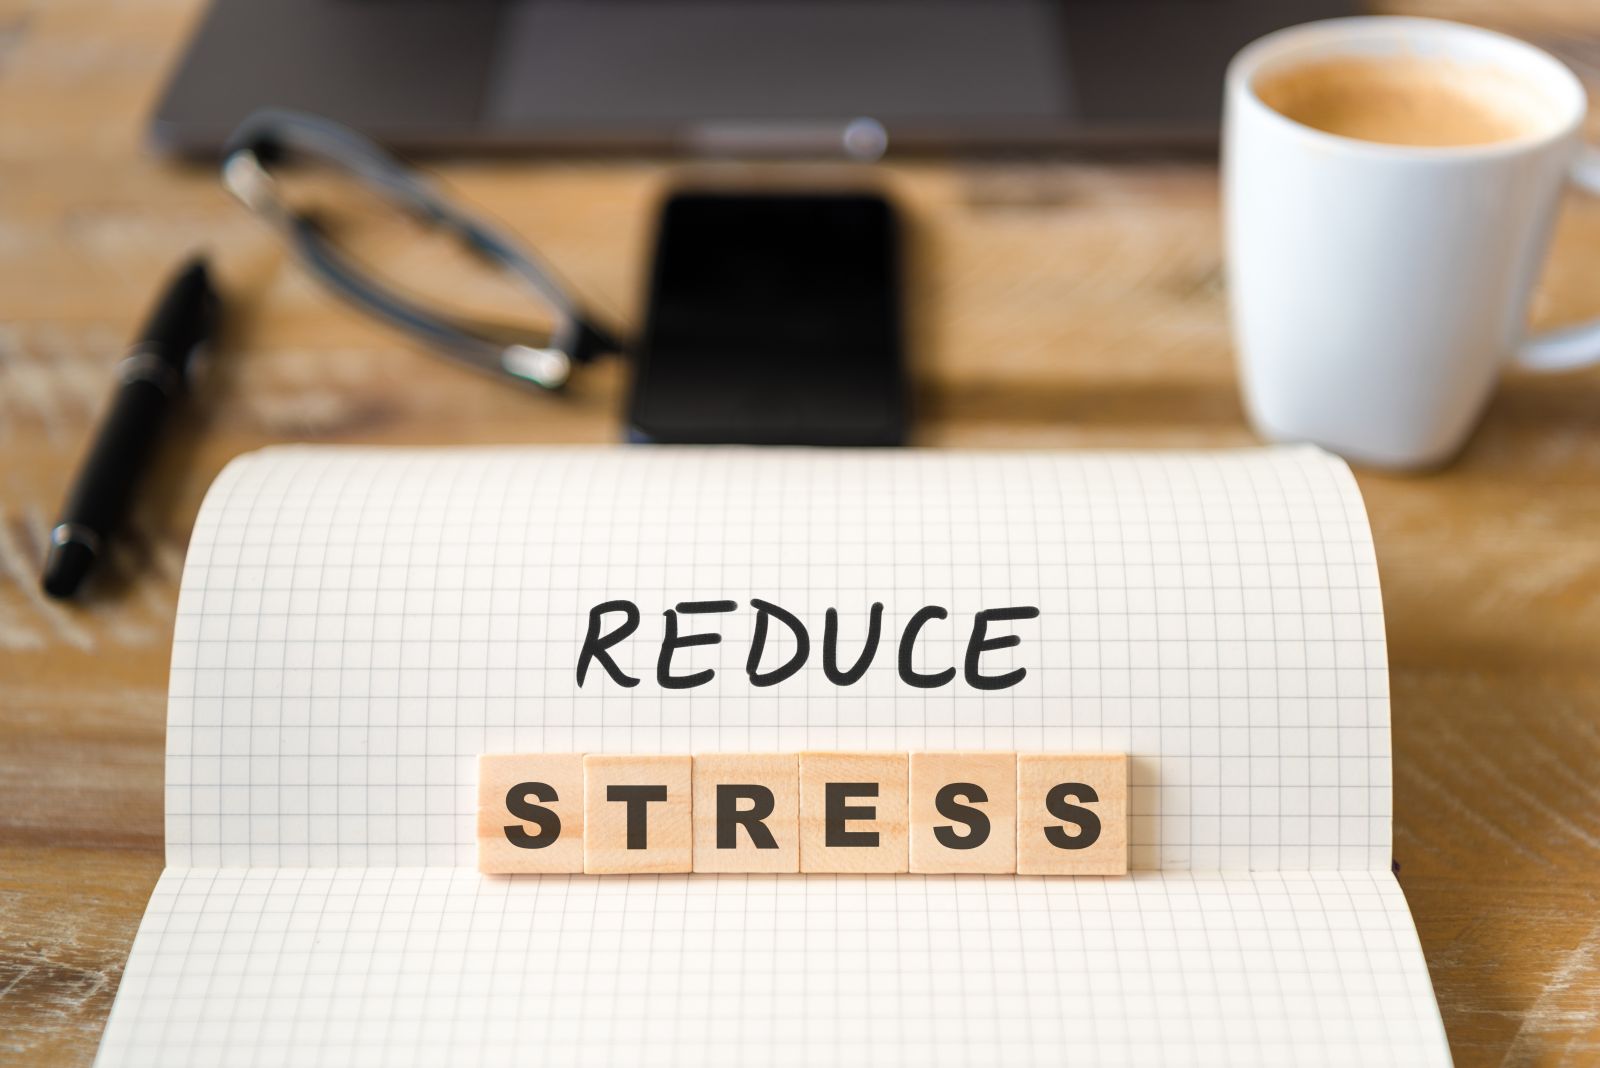 How Can Great Entrepreneurs Help Reduce Stress at Work?